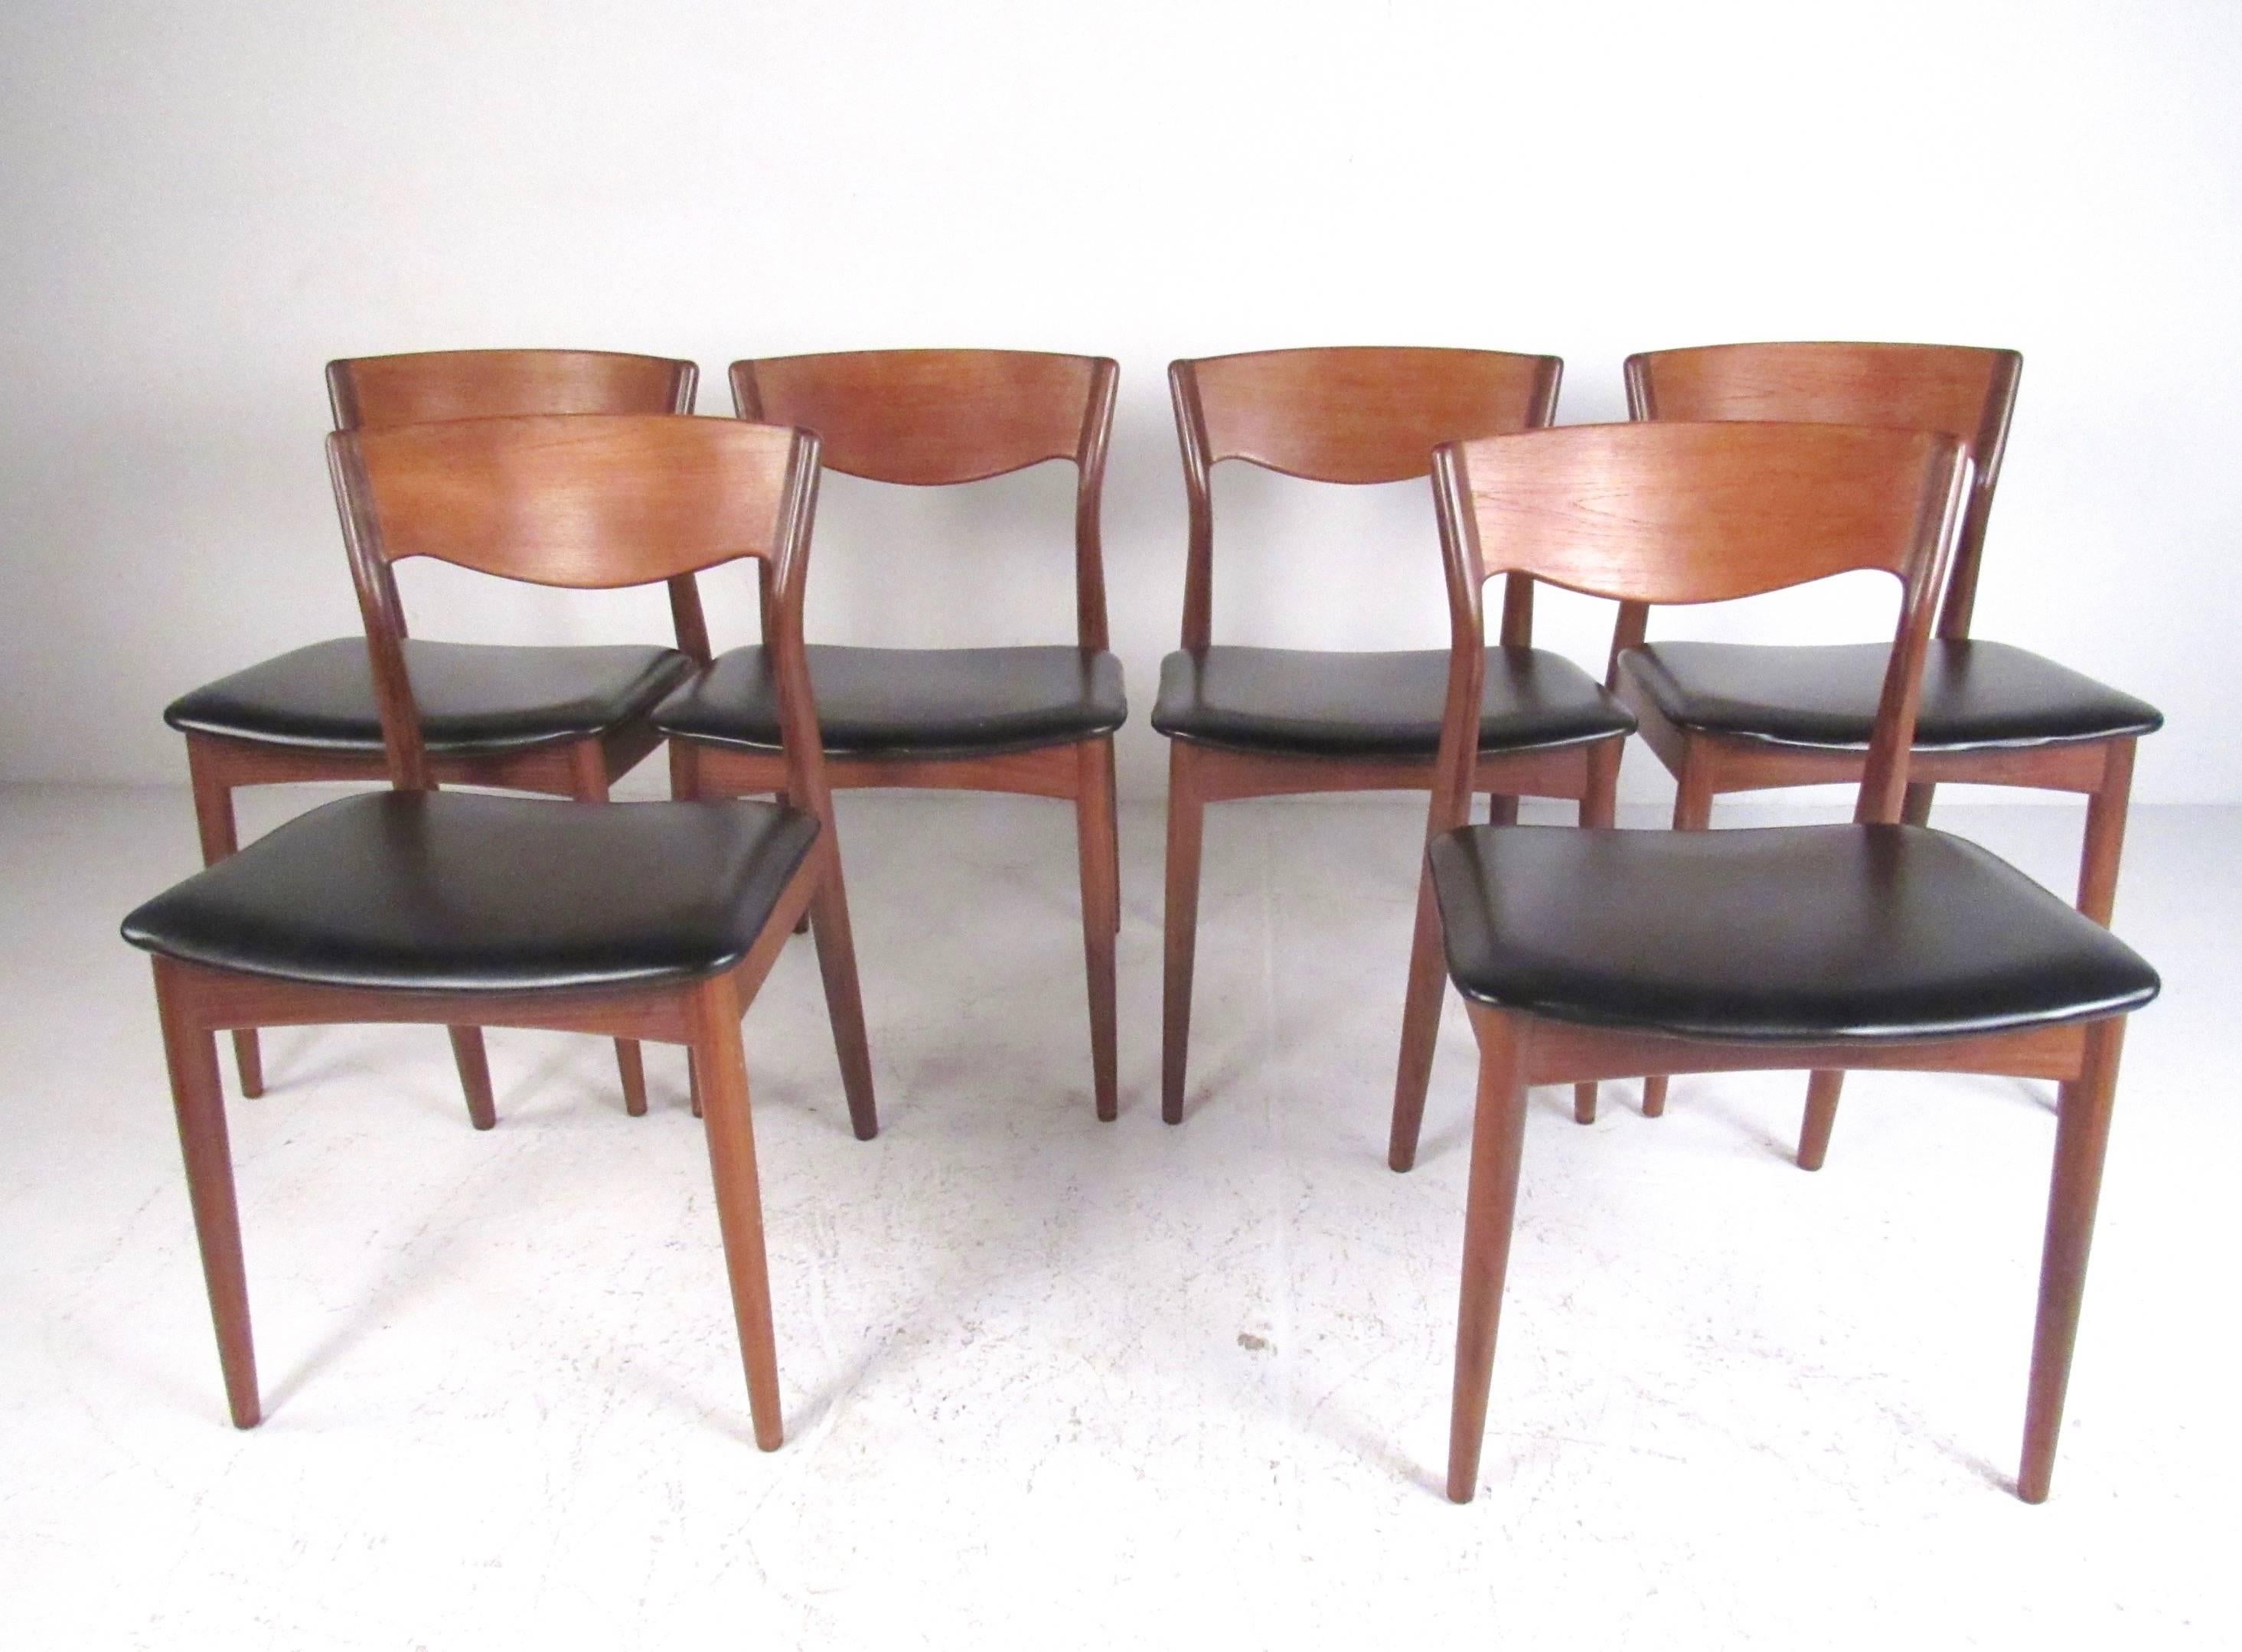 This stylish Danish modern dining set features six sculpted seats by Arne Hovmand Olsen for Mogens Kold Mobelfabrik are paired with this teak dining table. Comfortable sculpted teak dining chairs feature padded seats and attractive Mid-Century